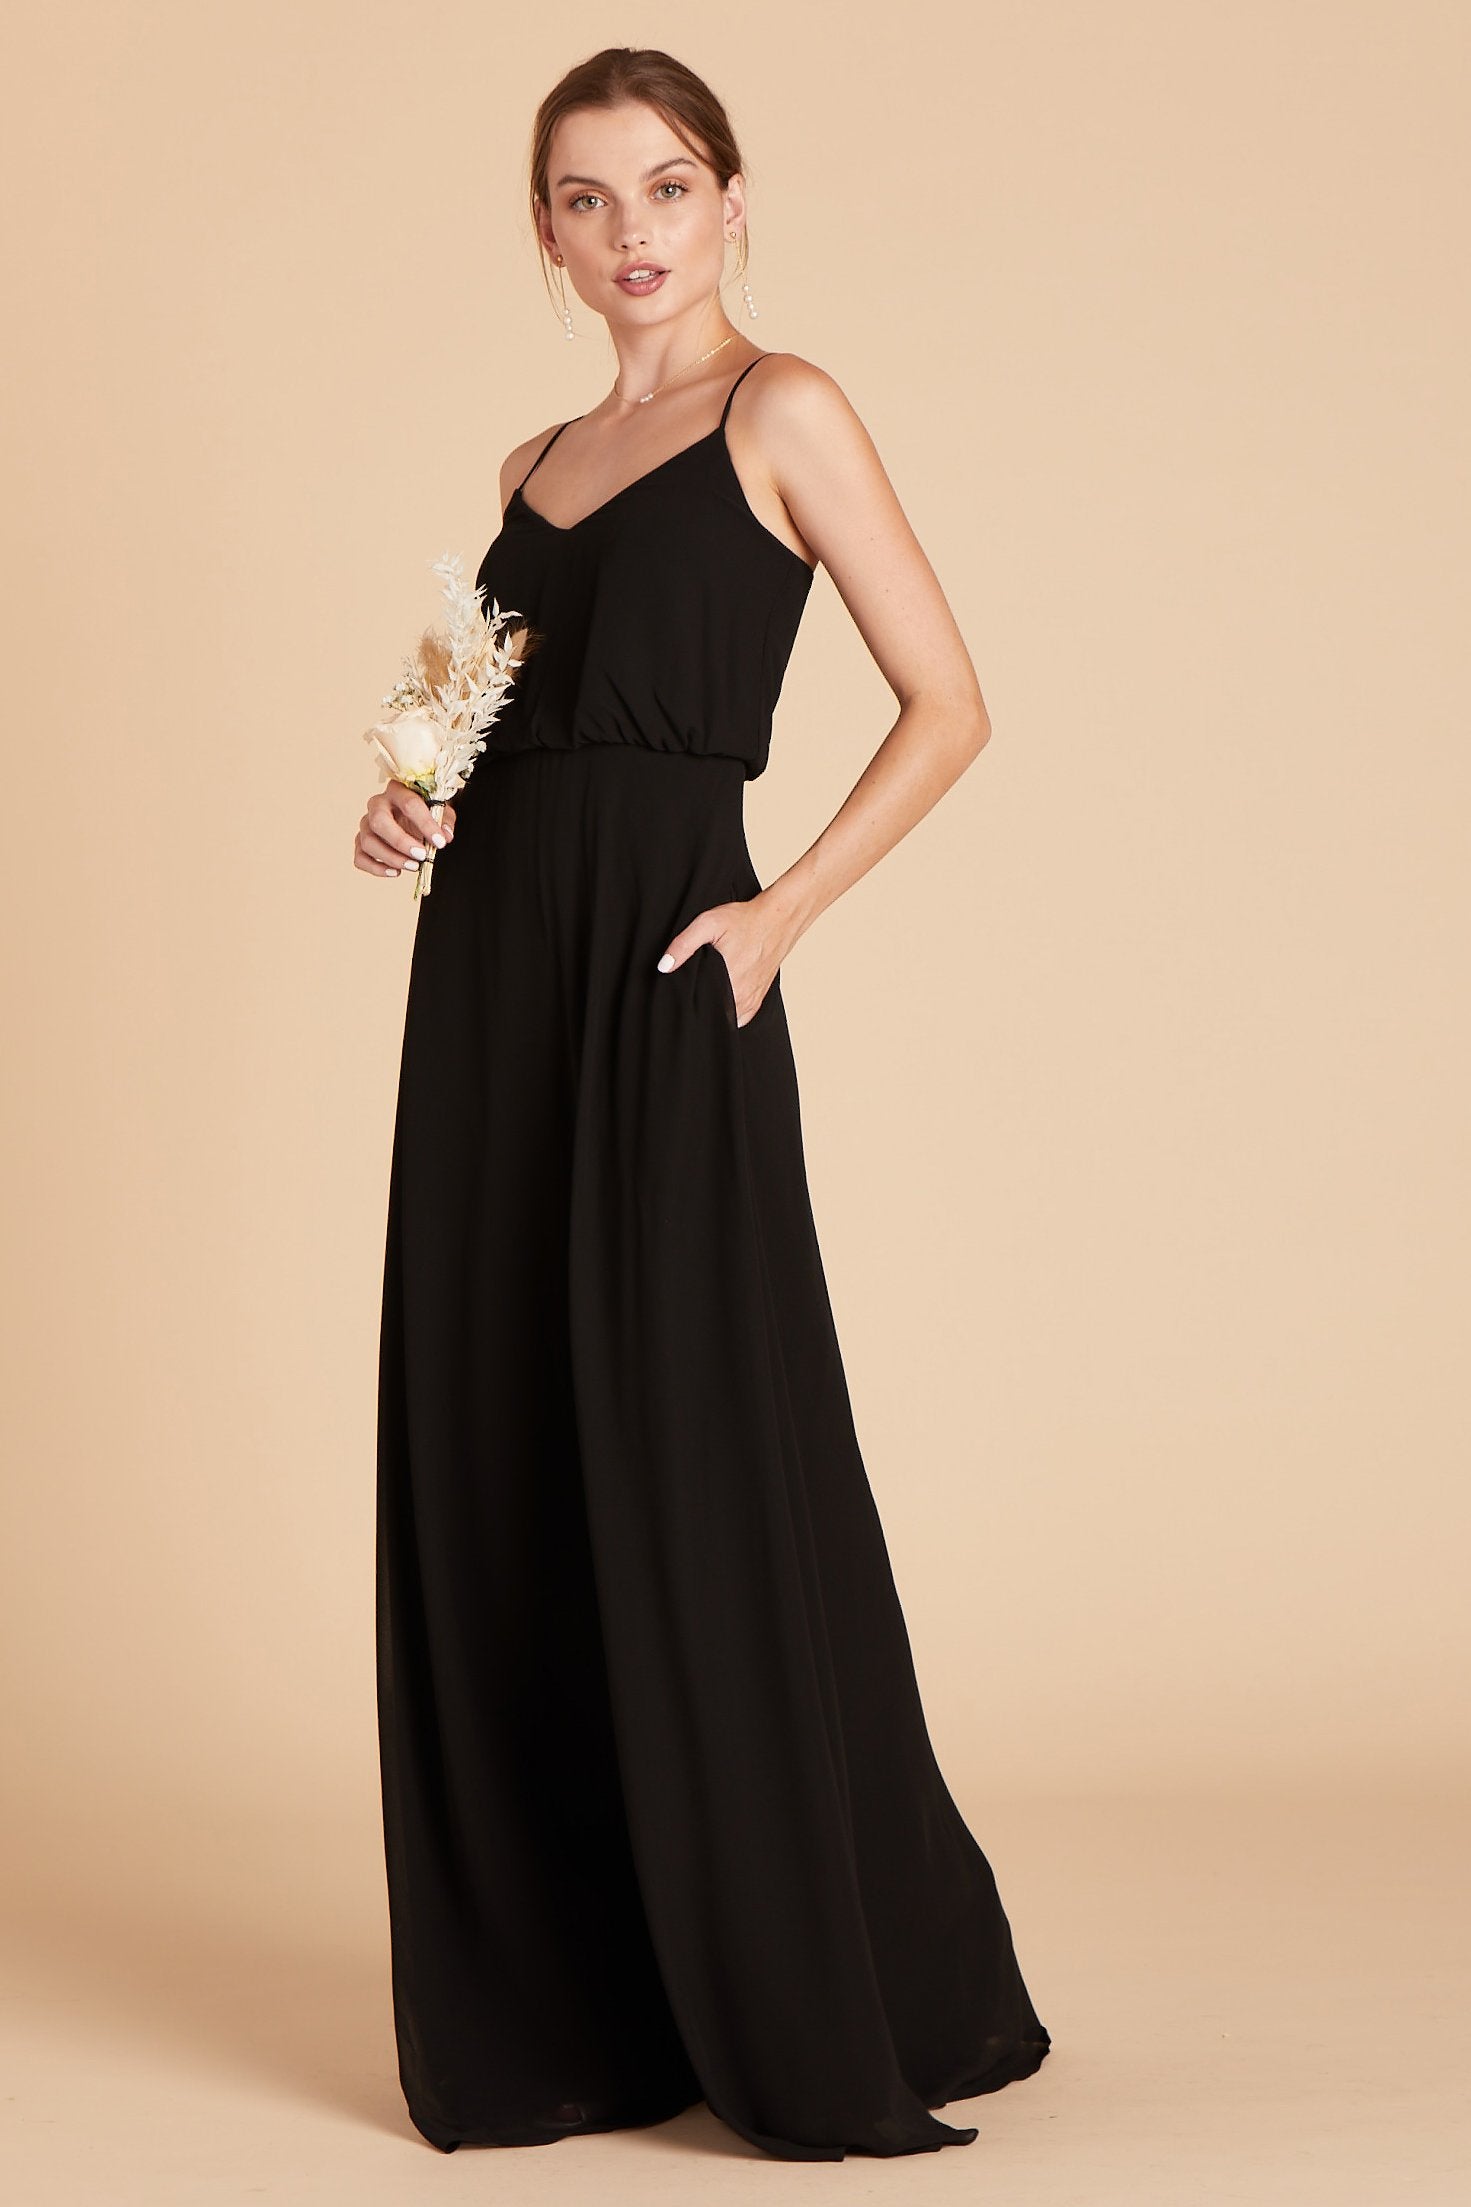 Gwennie bridesmaid dress in black chiffon by Birdy Grey, front view with hand in pocket